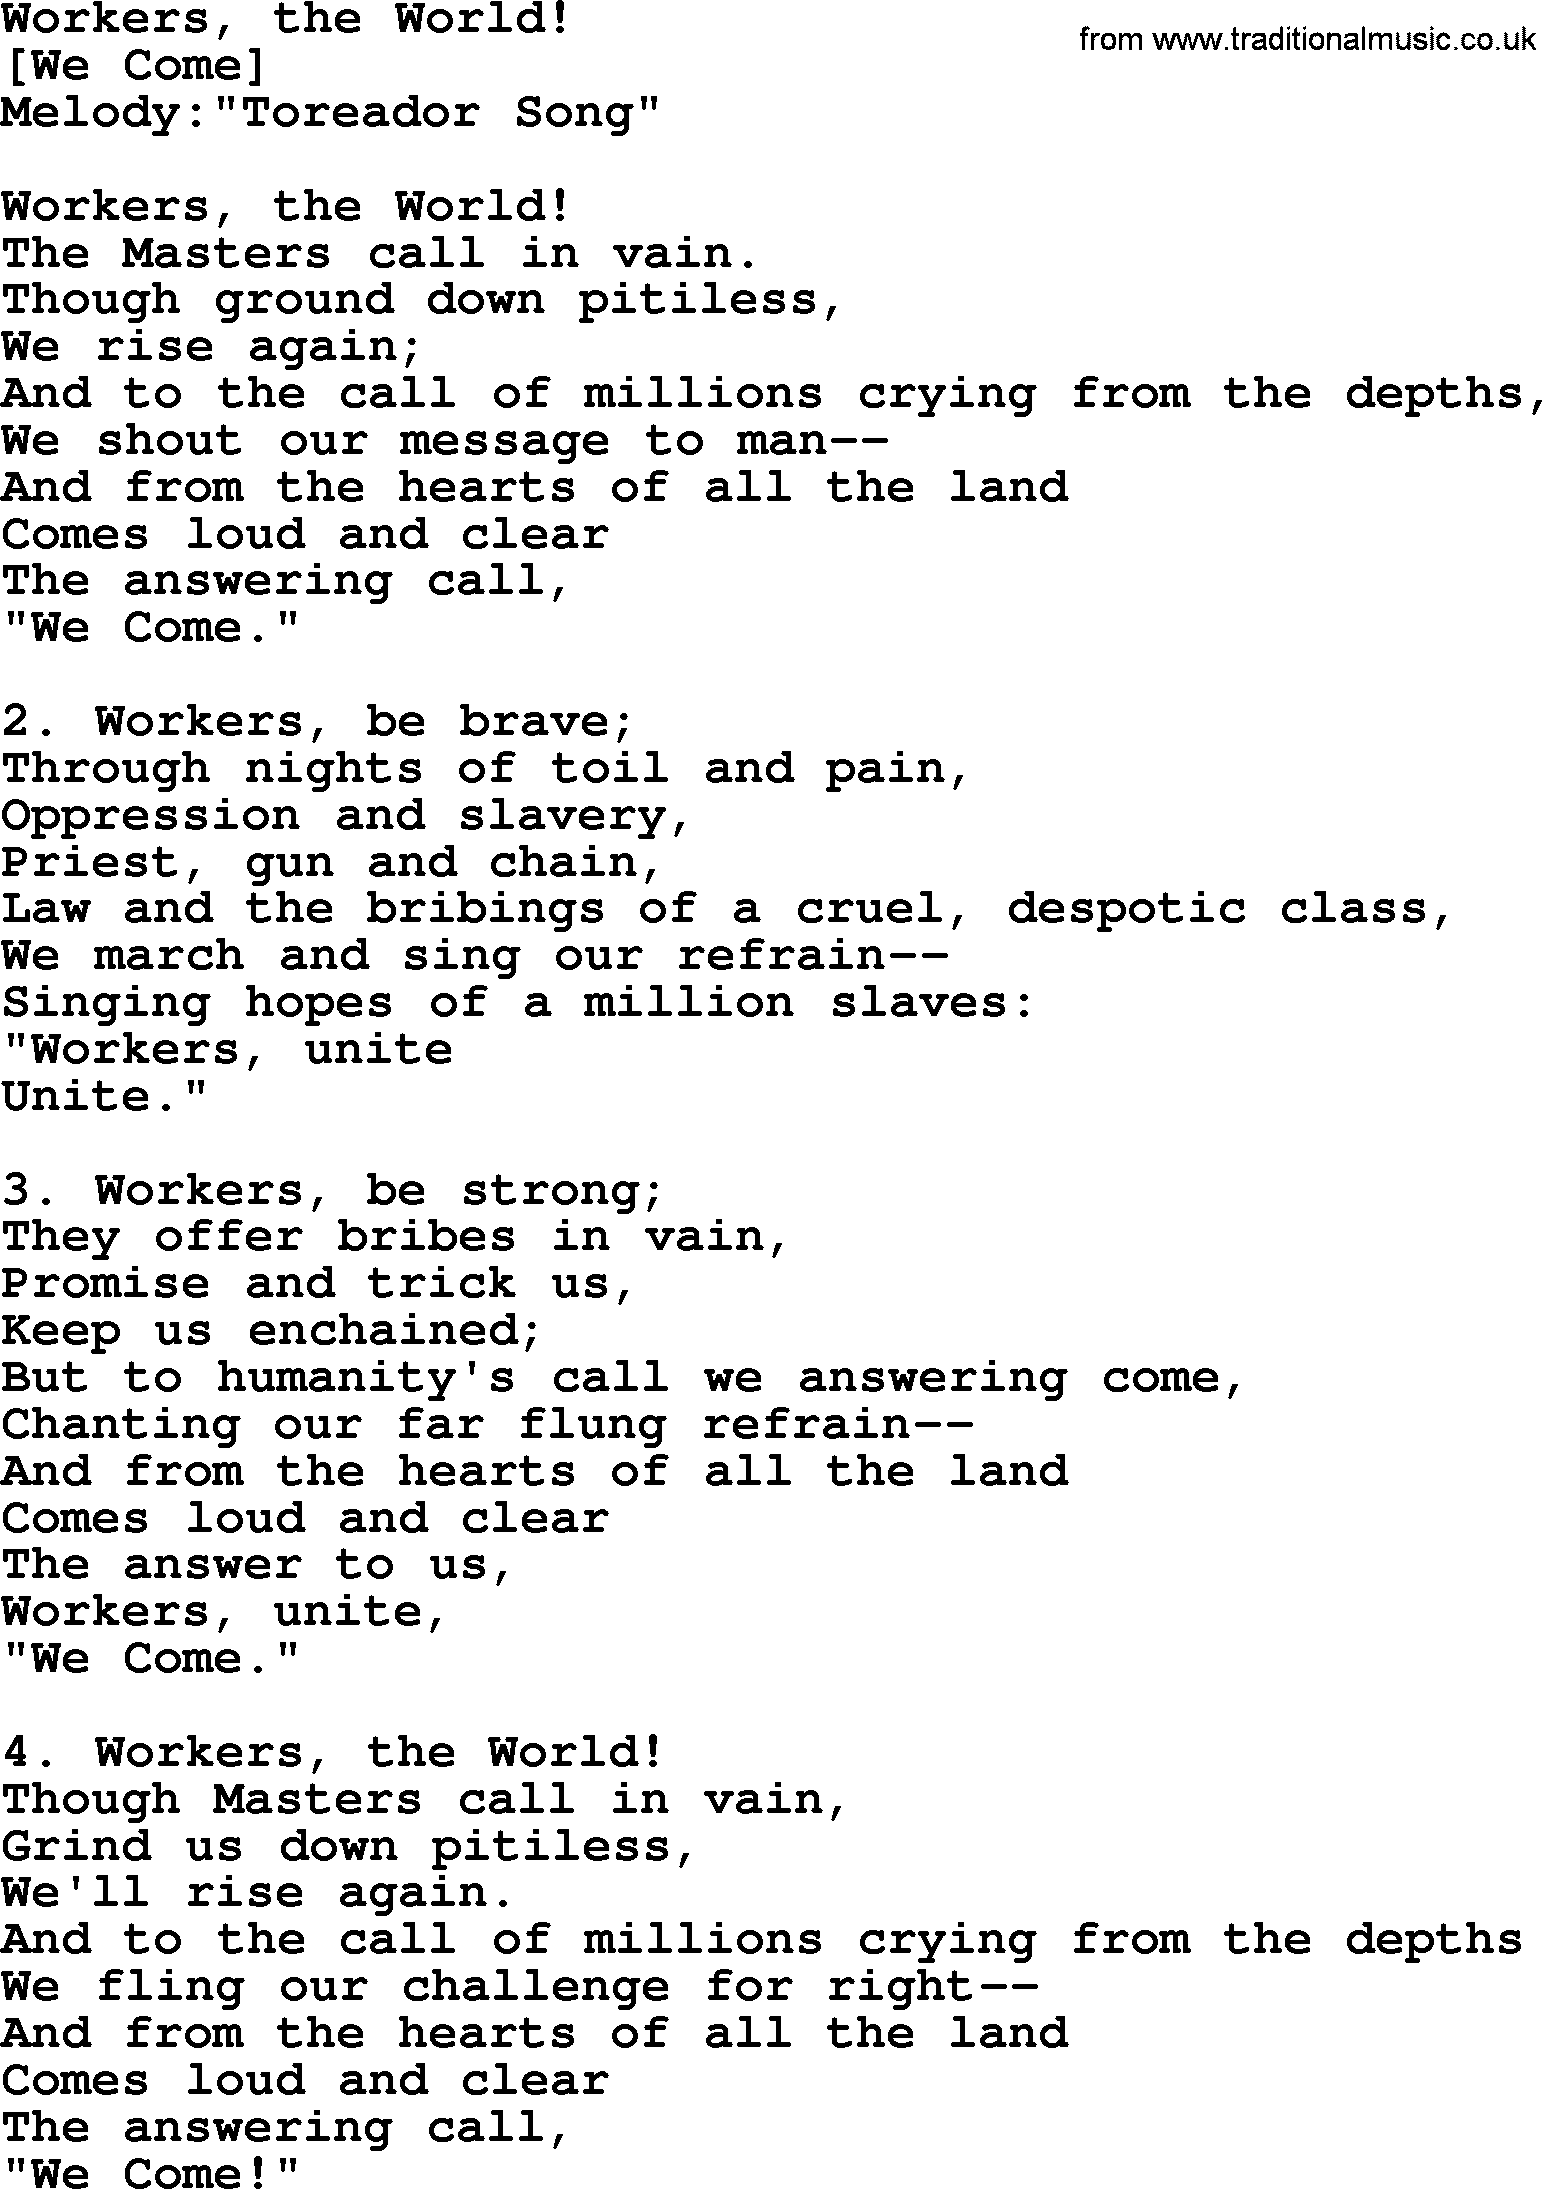 Old American Song: Workers, The World!, lyrics